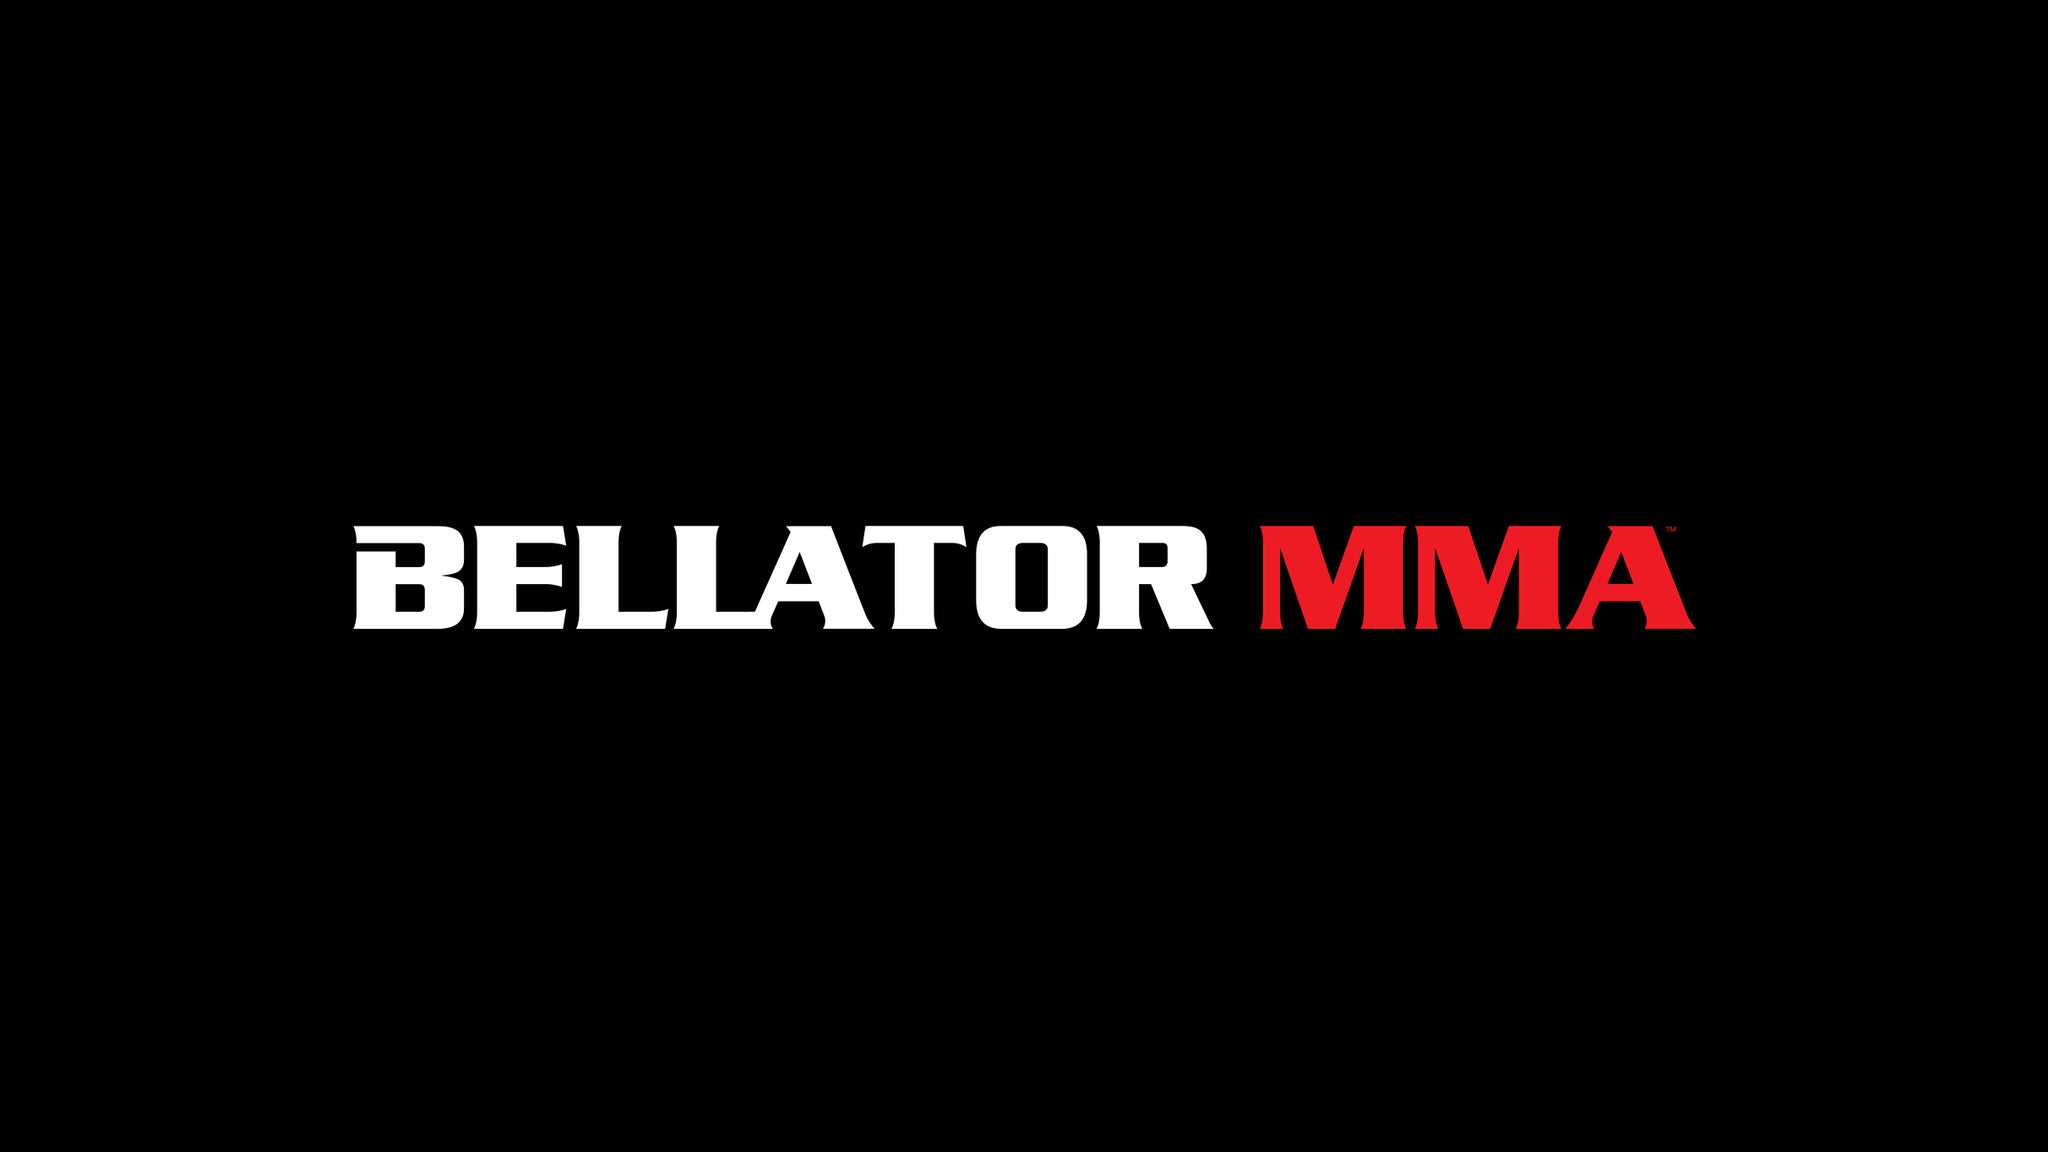 BELLATOR MMA presale code for early tickets in Tacoma